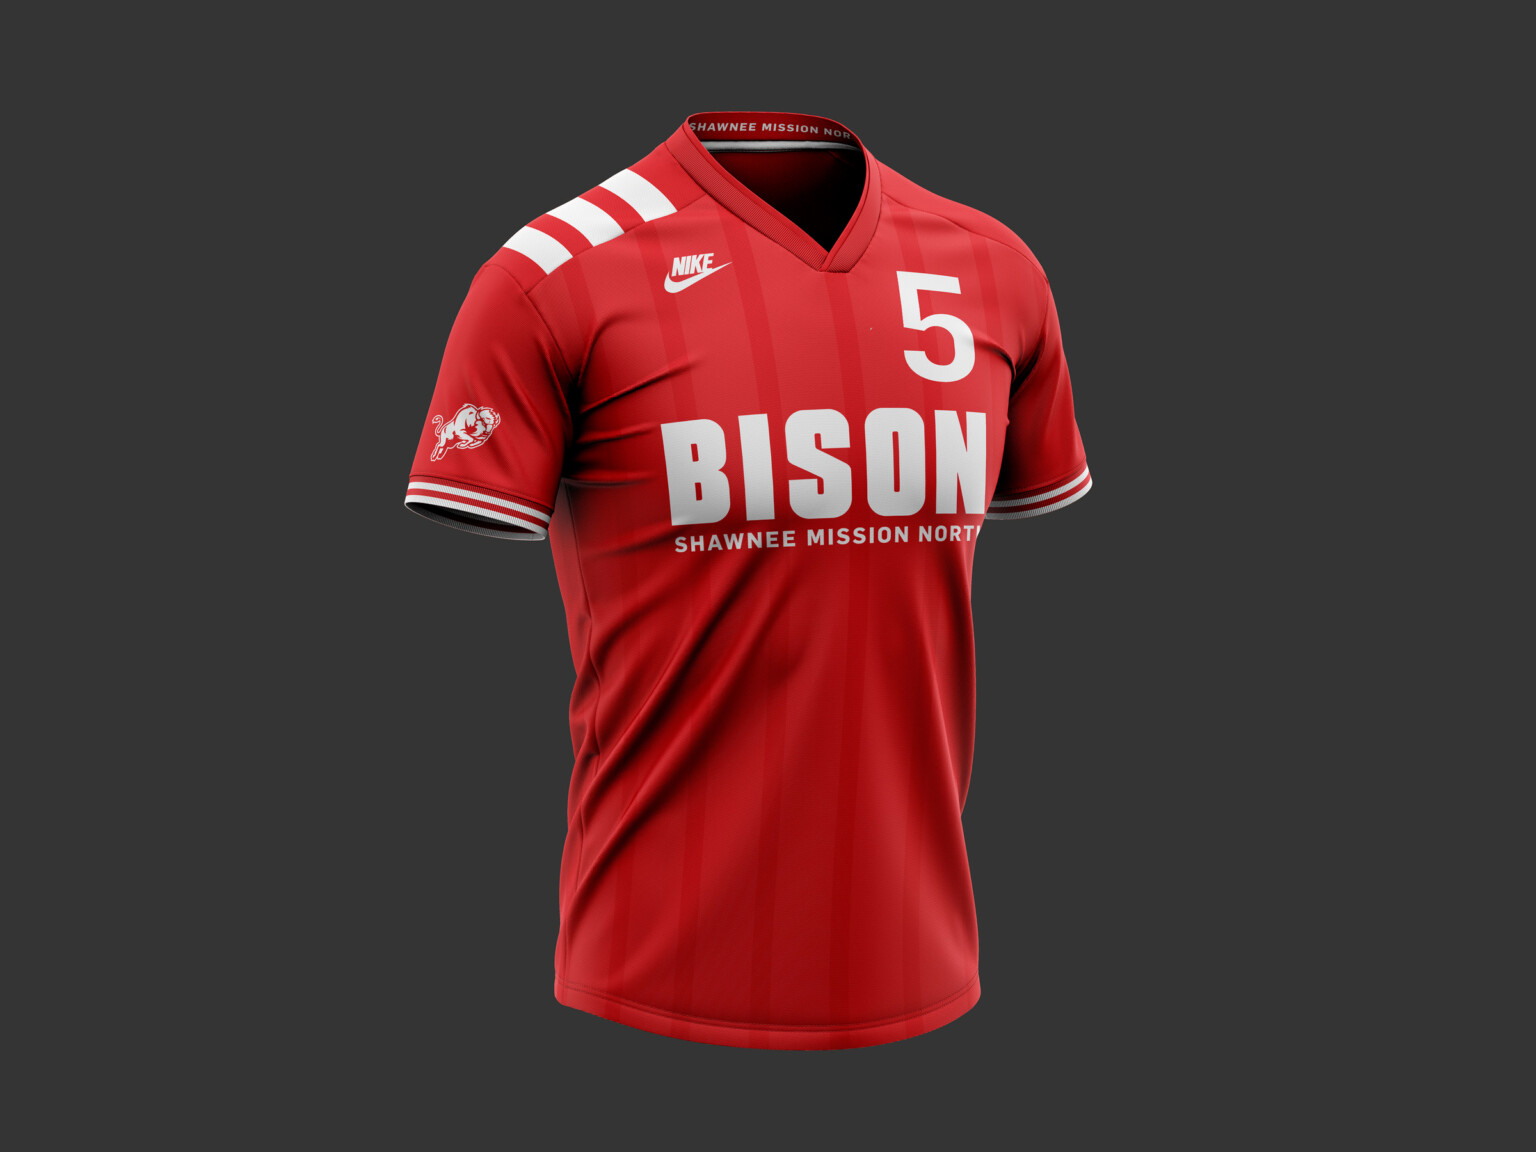 red jersey tshirt with white and red accents, Bison written across front